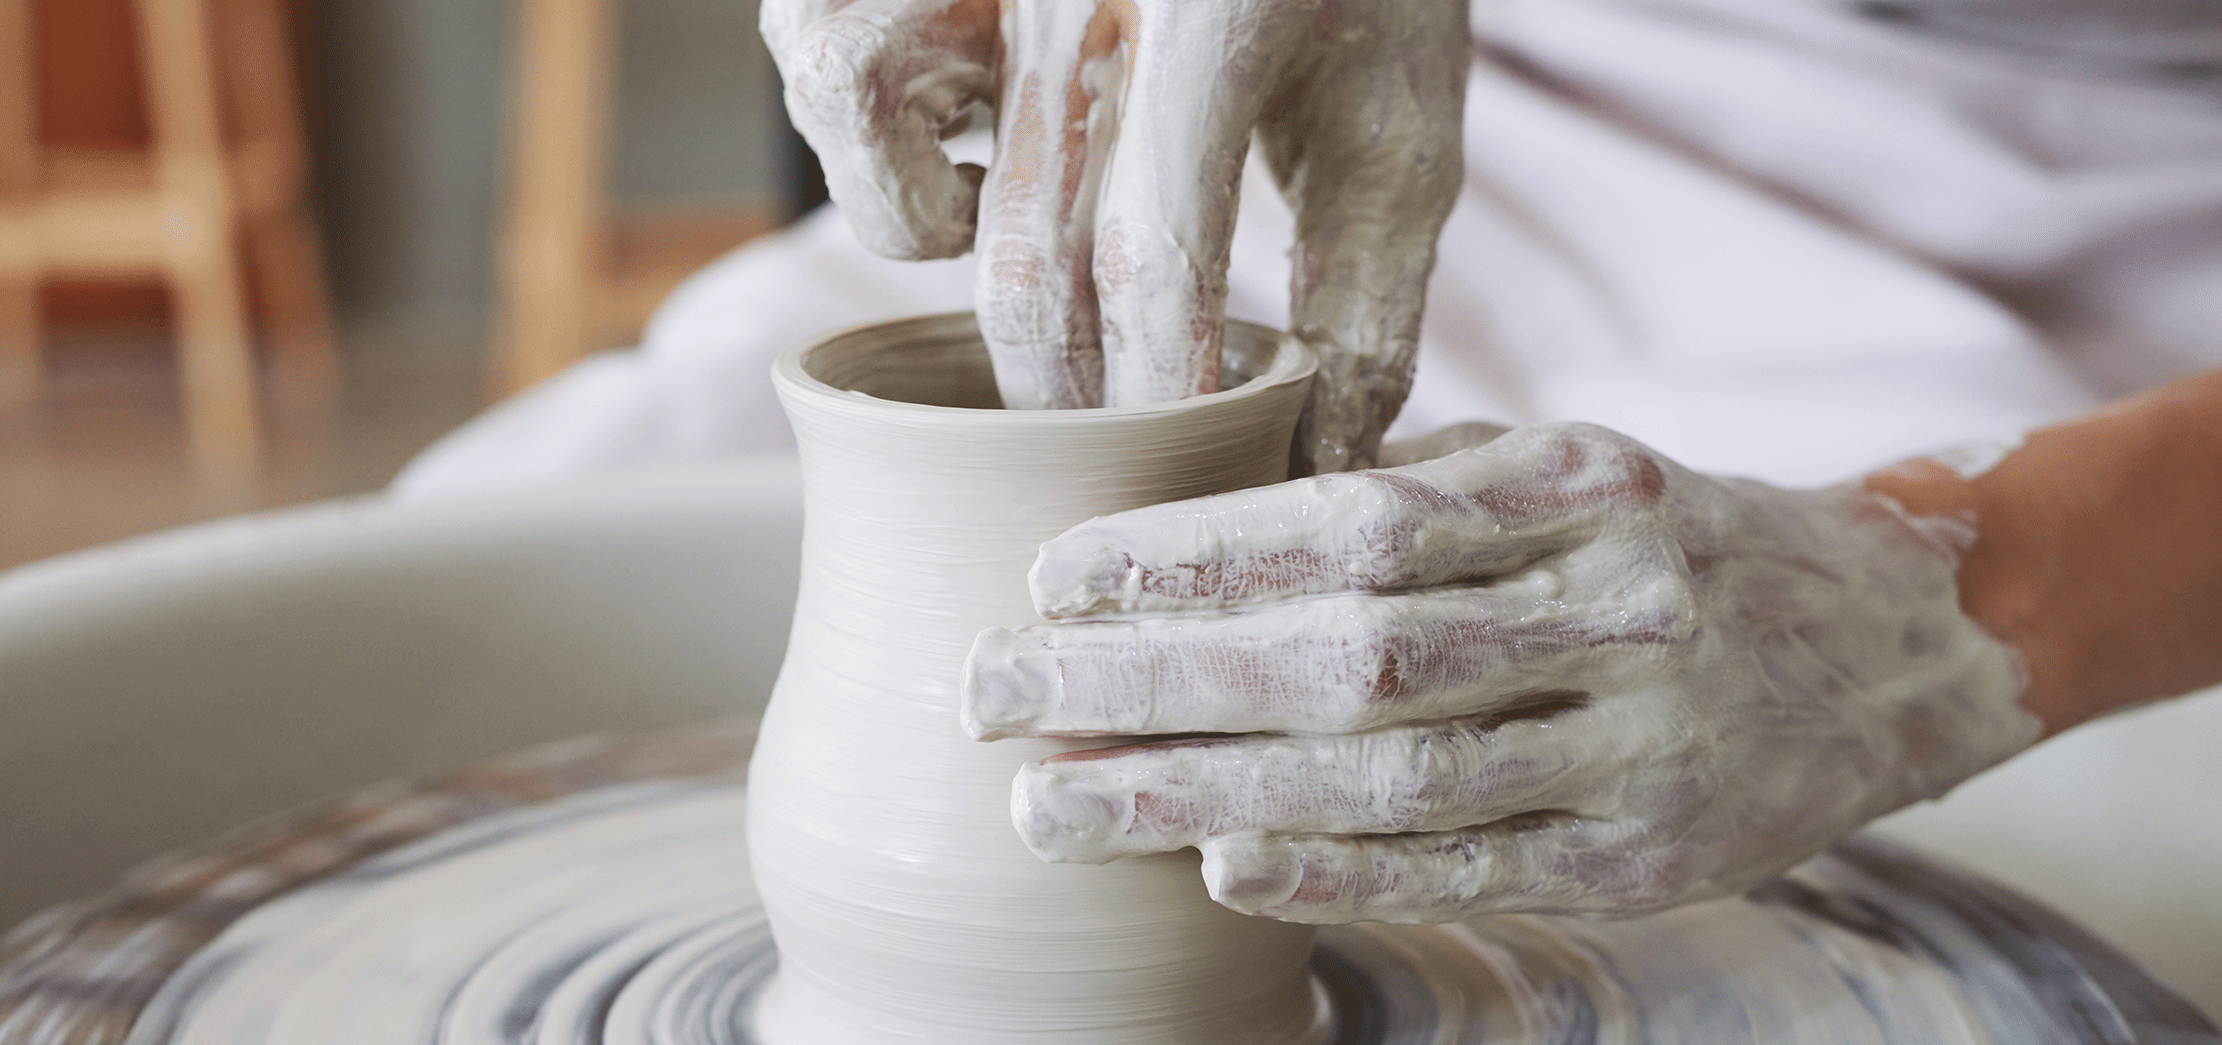 5 Facts On The Safety Of Ceramic Usage In Your Home